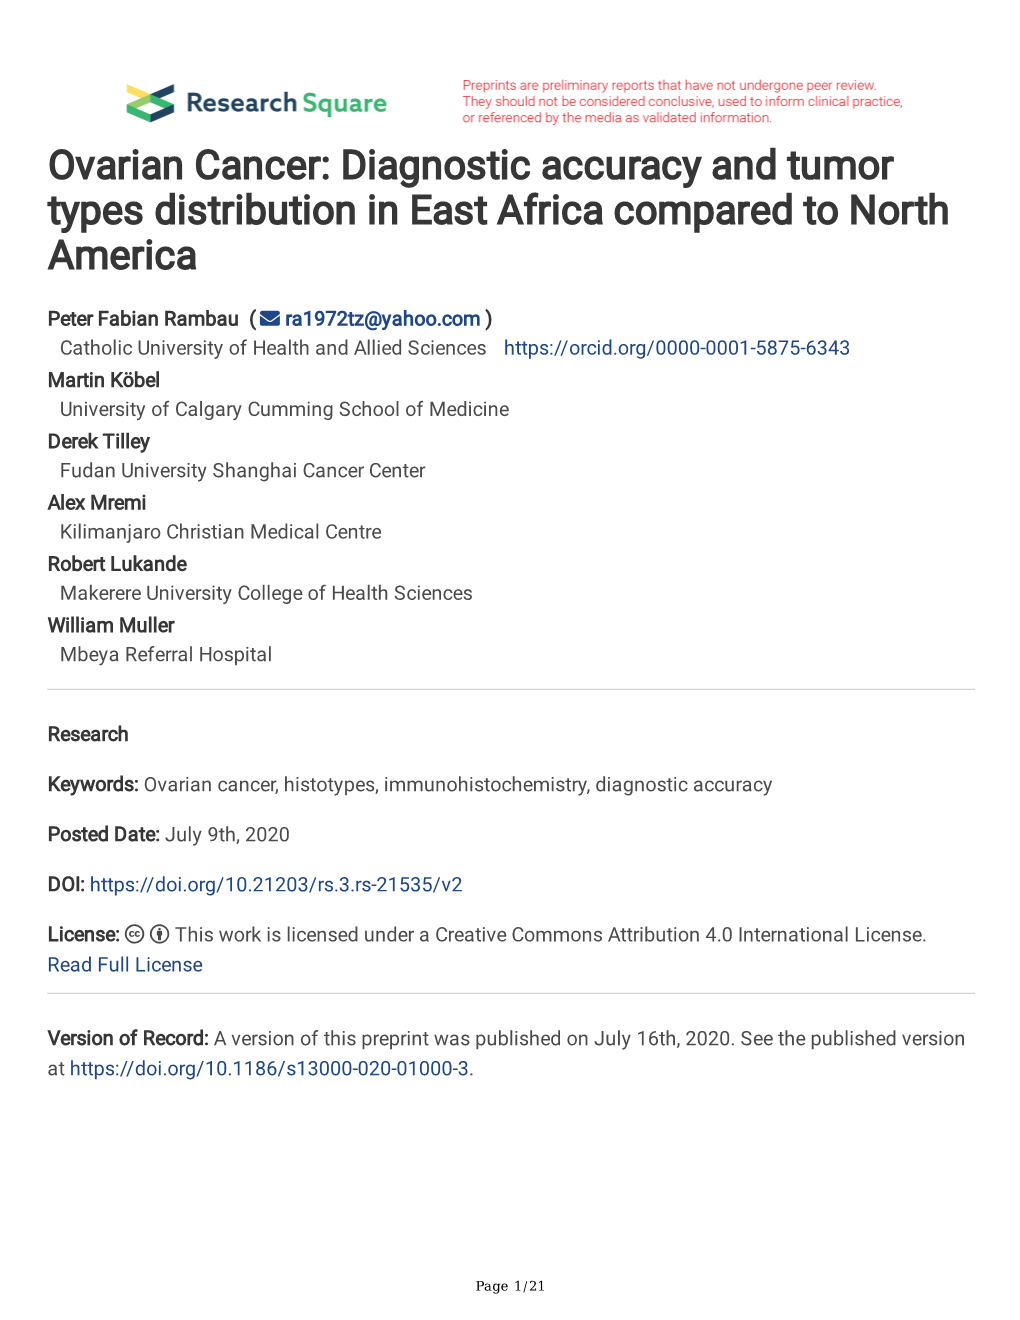 Ovarian Cancer: Diagnostic Accuracy and Tumor Types Distribution in East Africa Compared to North America